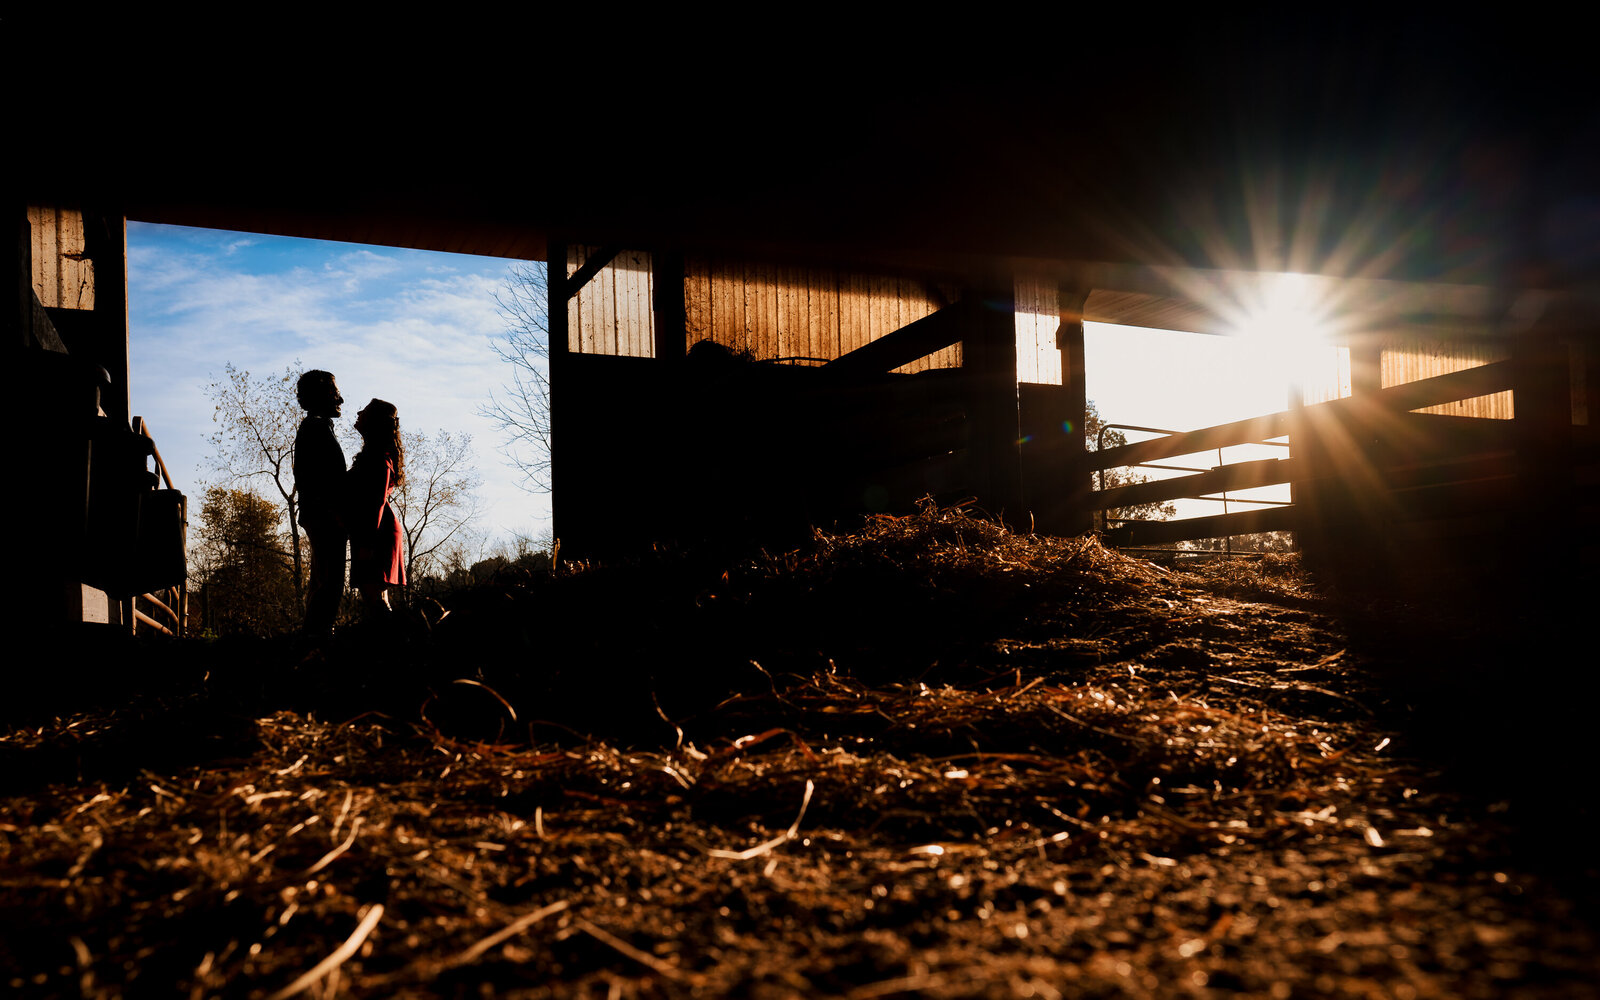 Capture your Warren County, NJ engagement with expert photography.